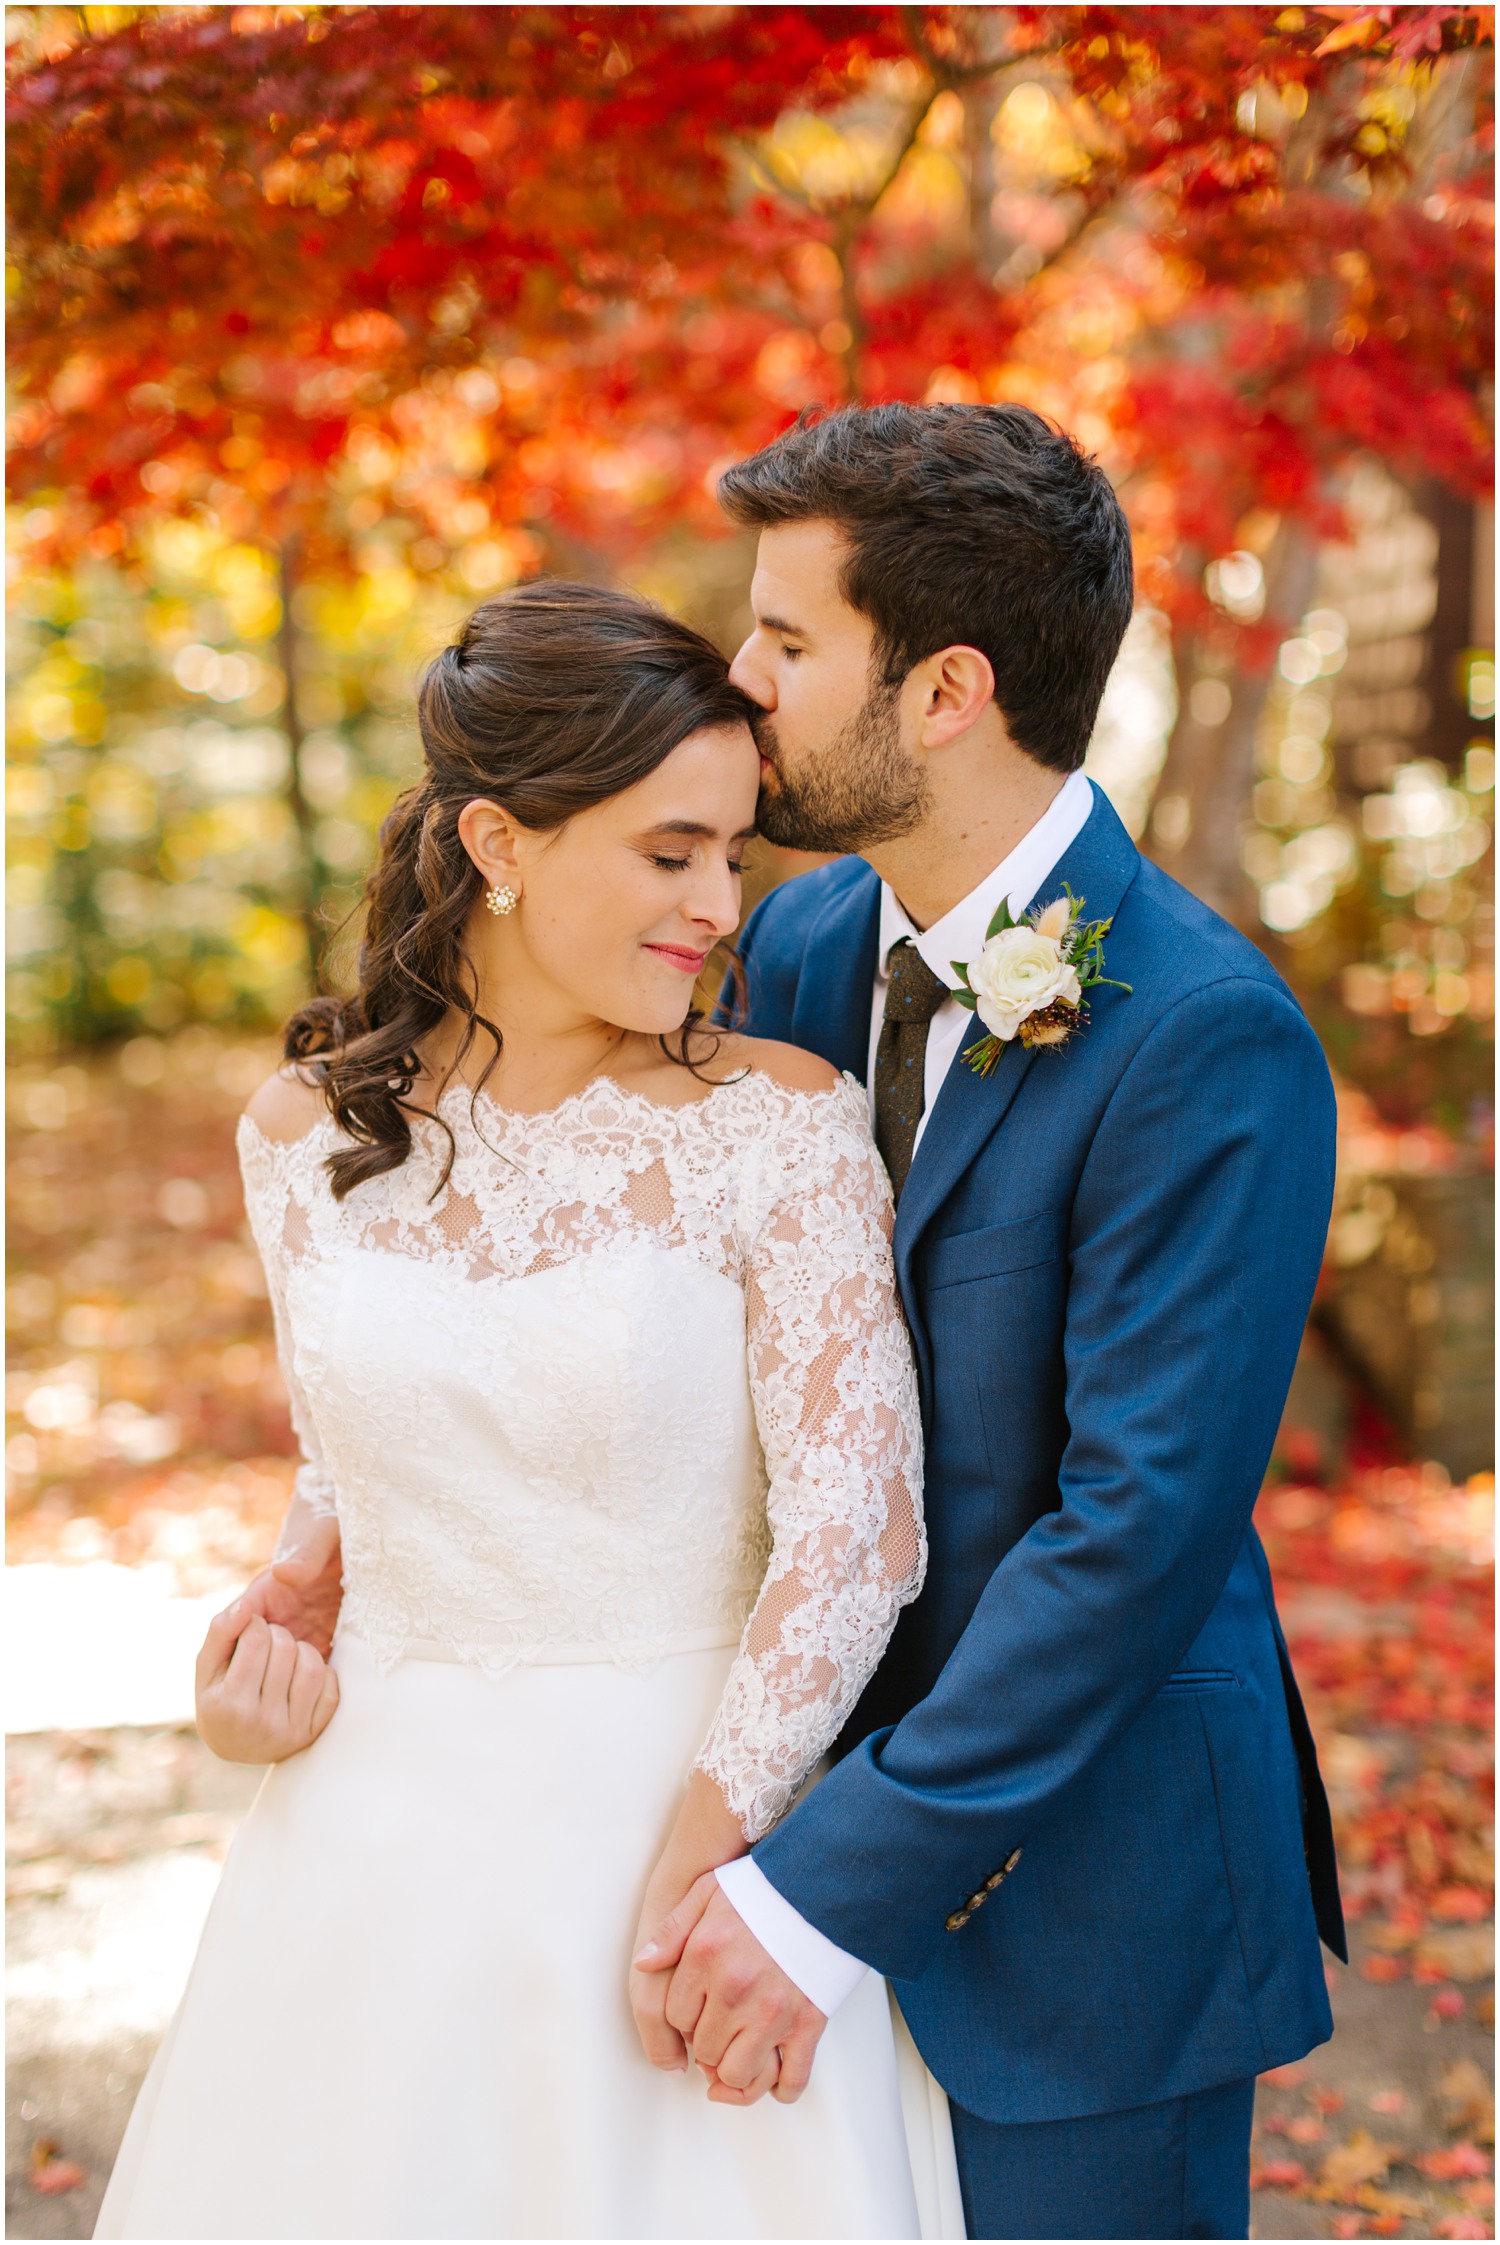 Asheville wedding portraits in fall leaves by Chelsea Renay